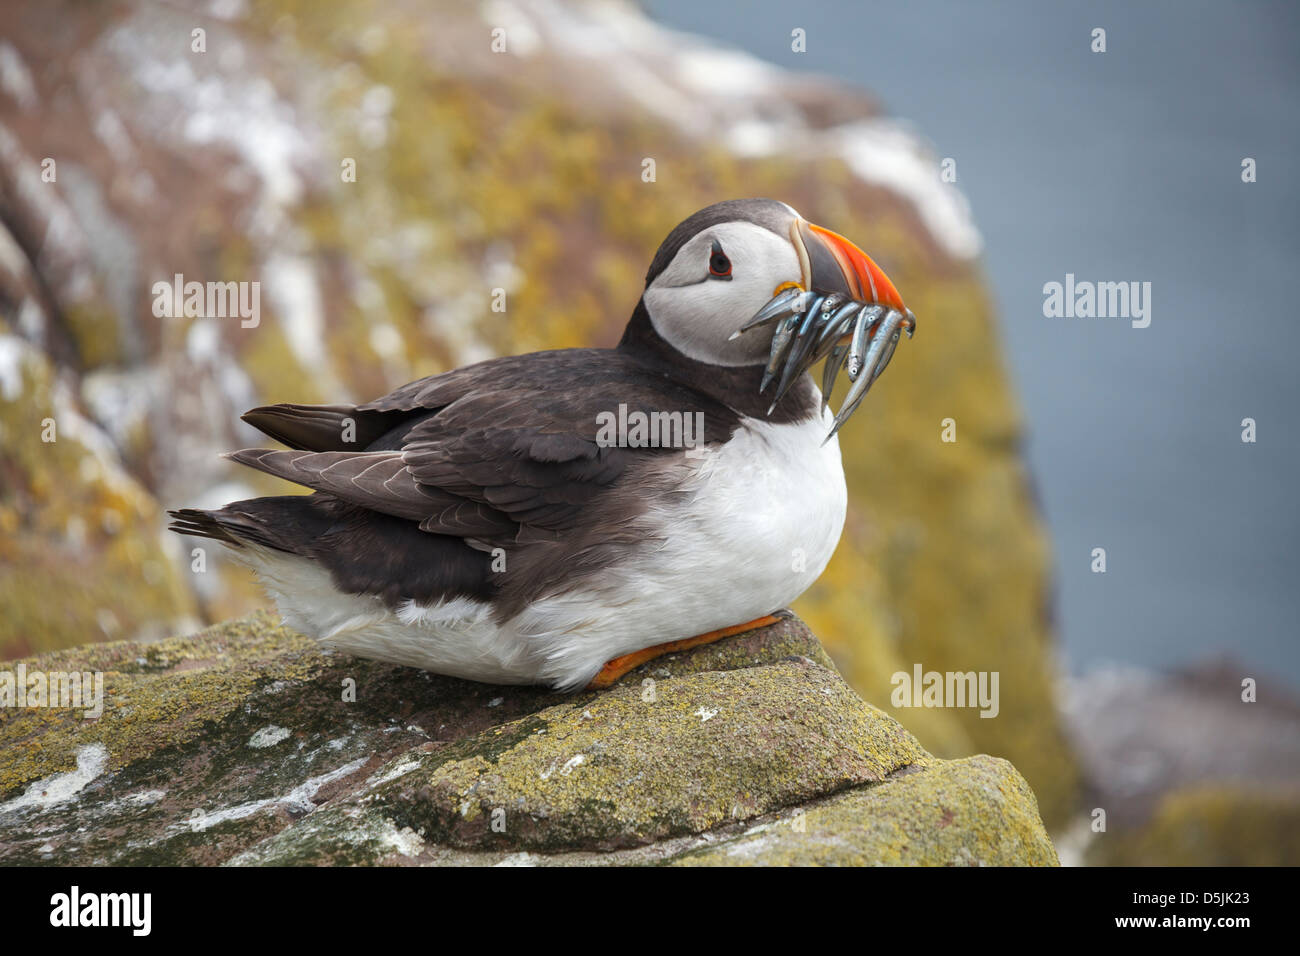 A puffin sitting with Sand Eels in its beak.  Captured on Inner Farne, part of the Farne Islands in Northumberland. Stock Photo